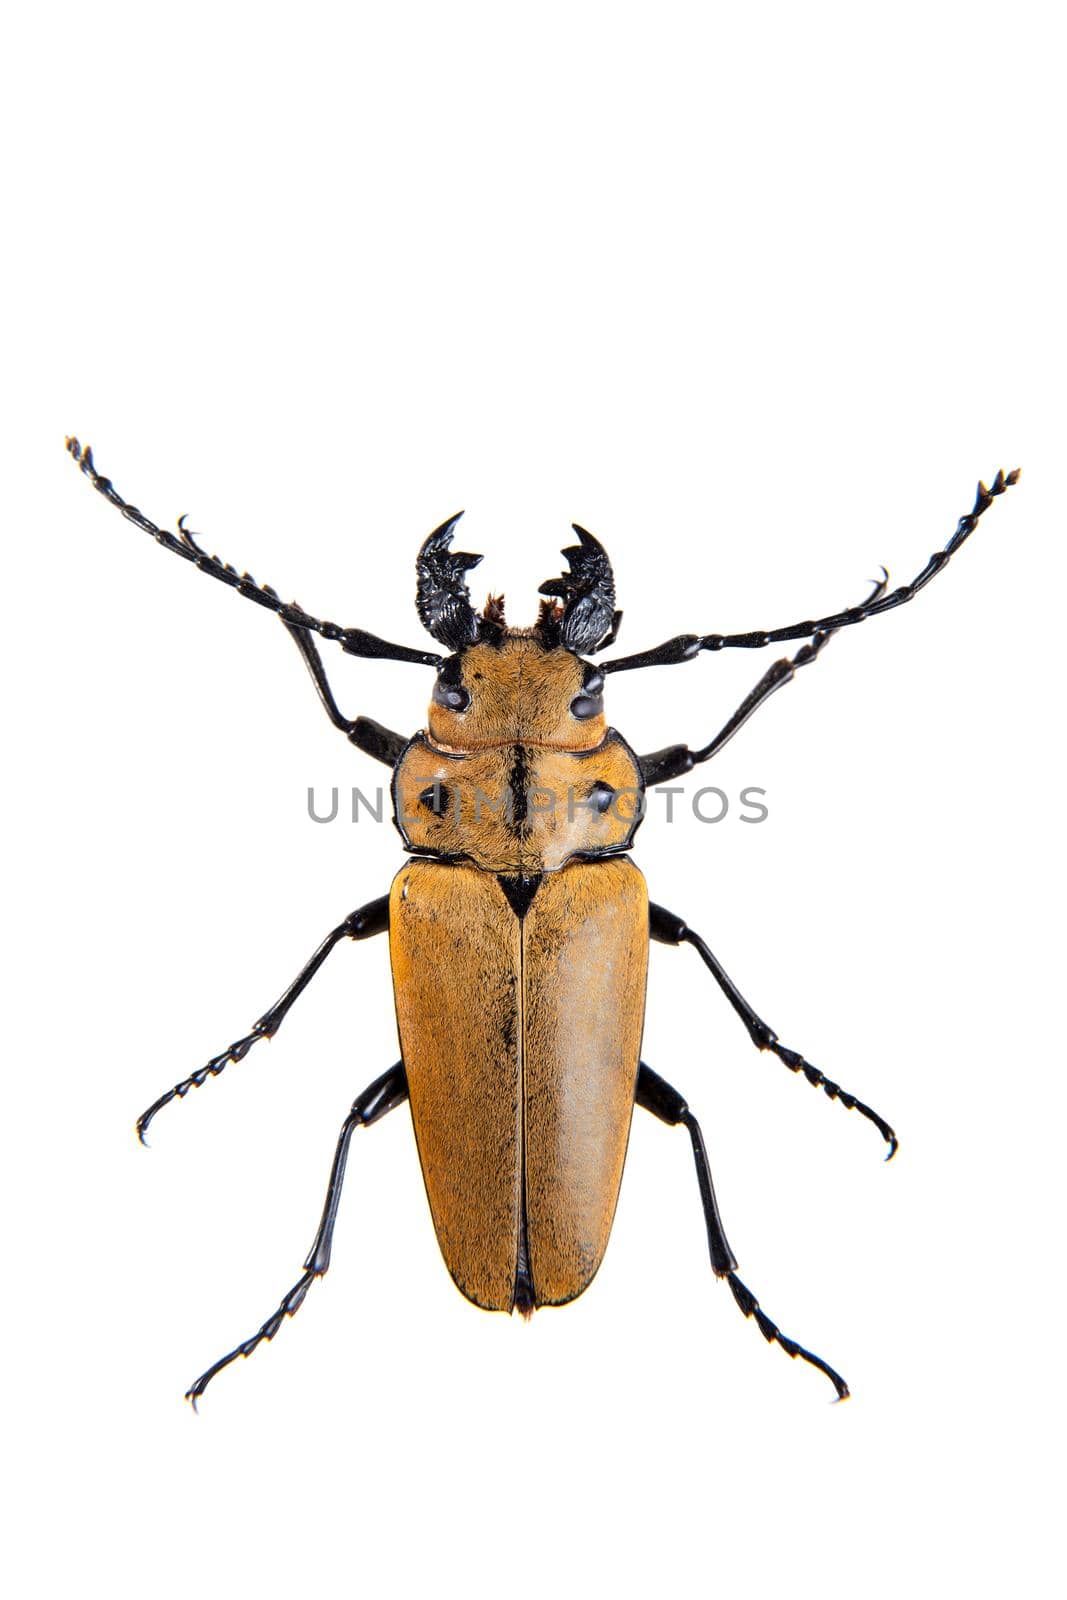 The Pine sawyer beetle on the white background by RosaJay